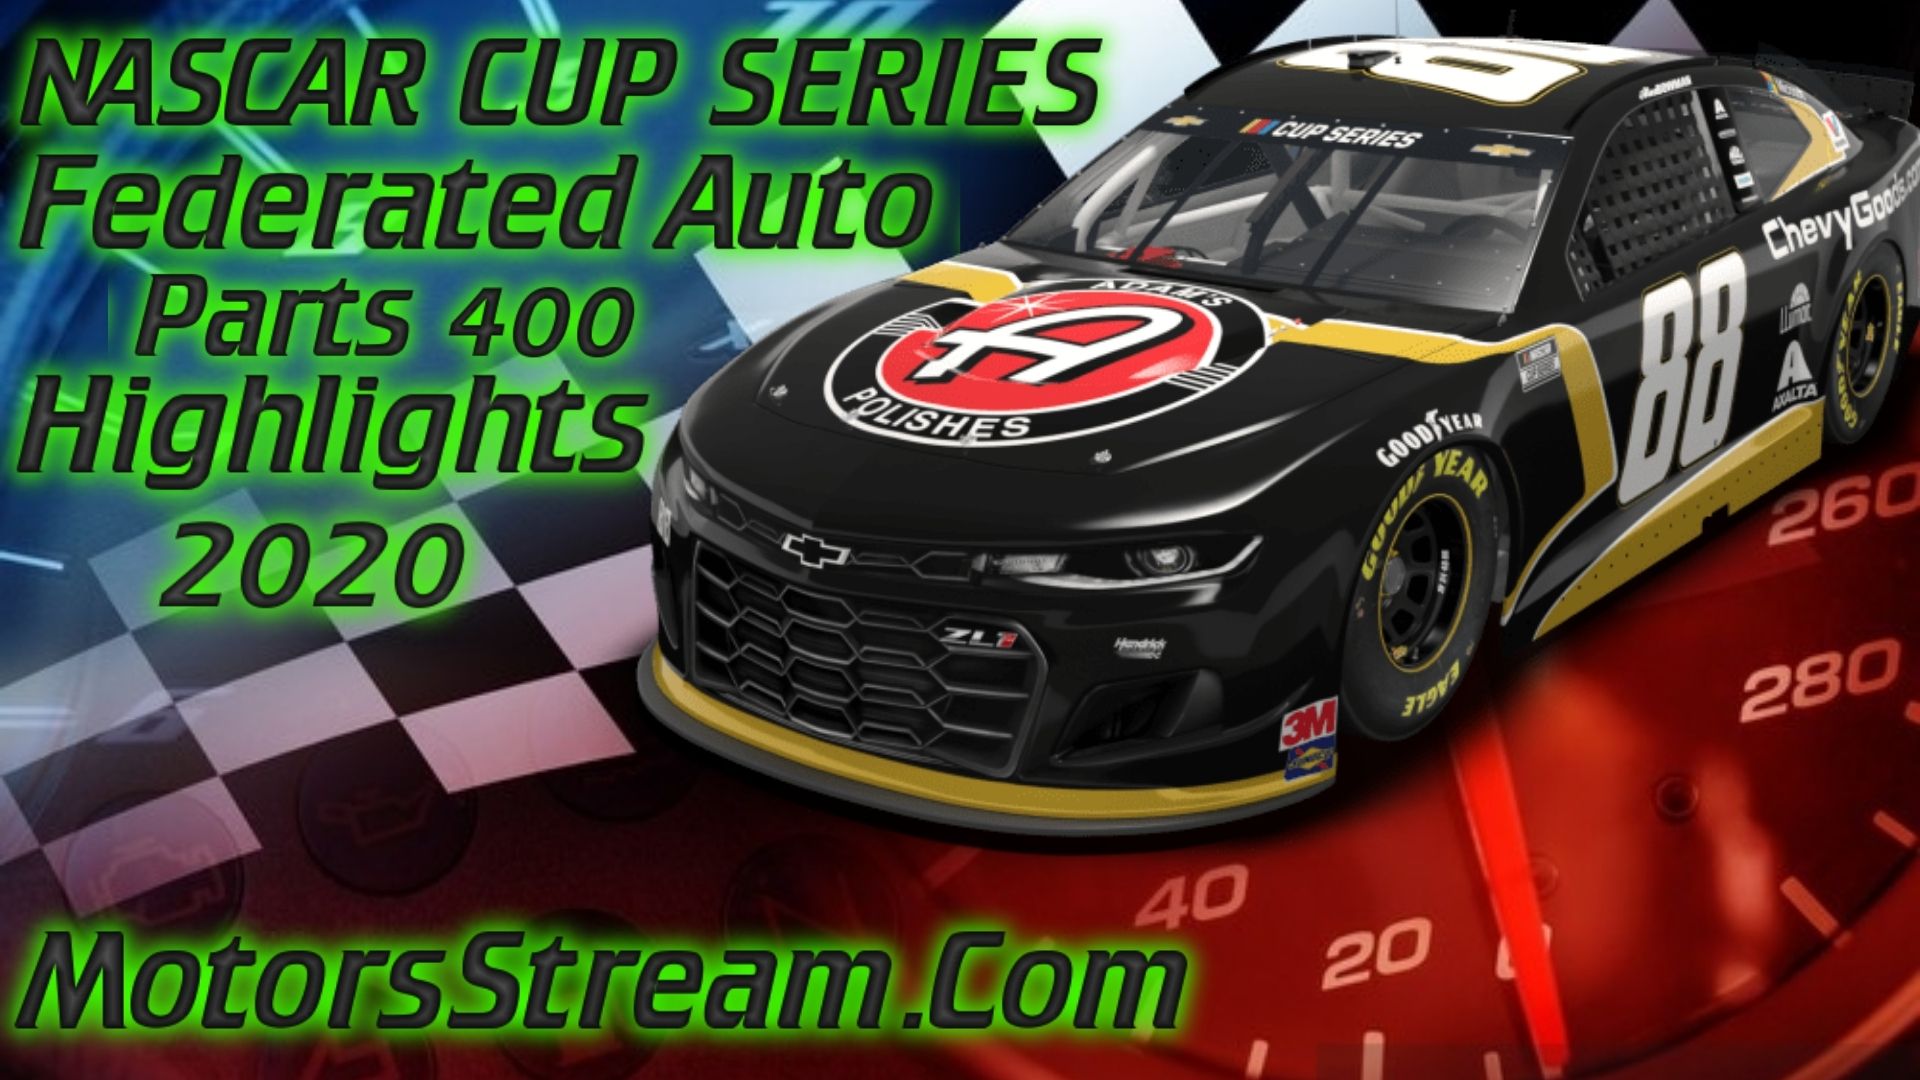 Federated Auto Parts 400 Highlights 2020 NASCARCup Series